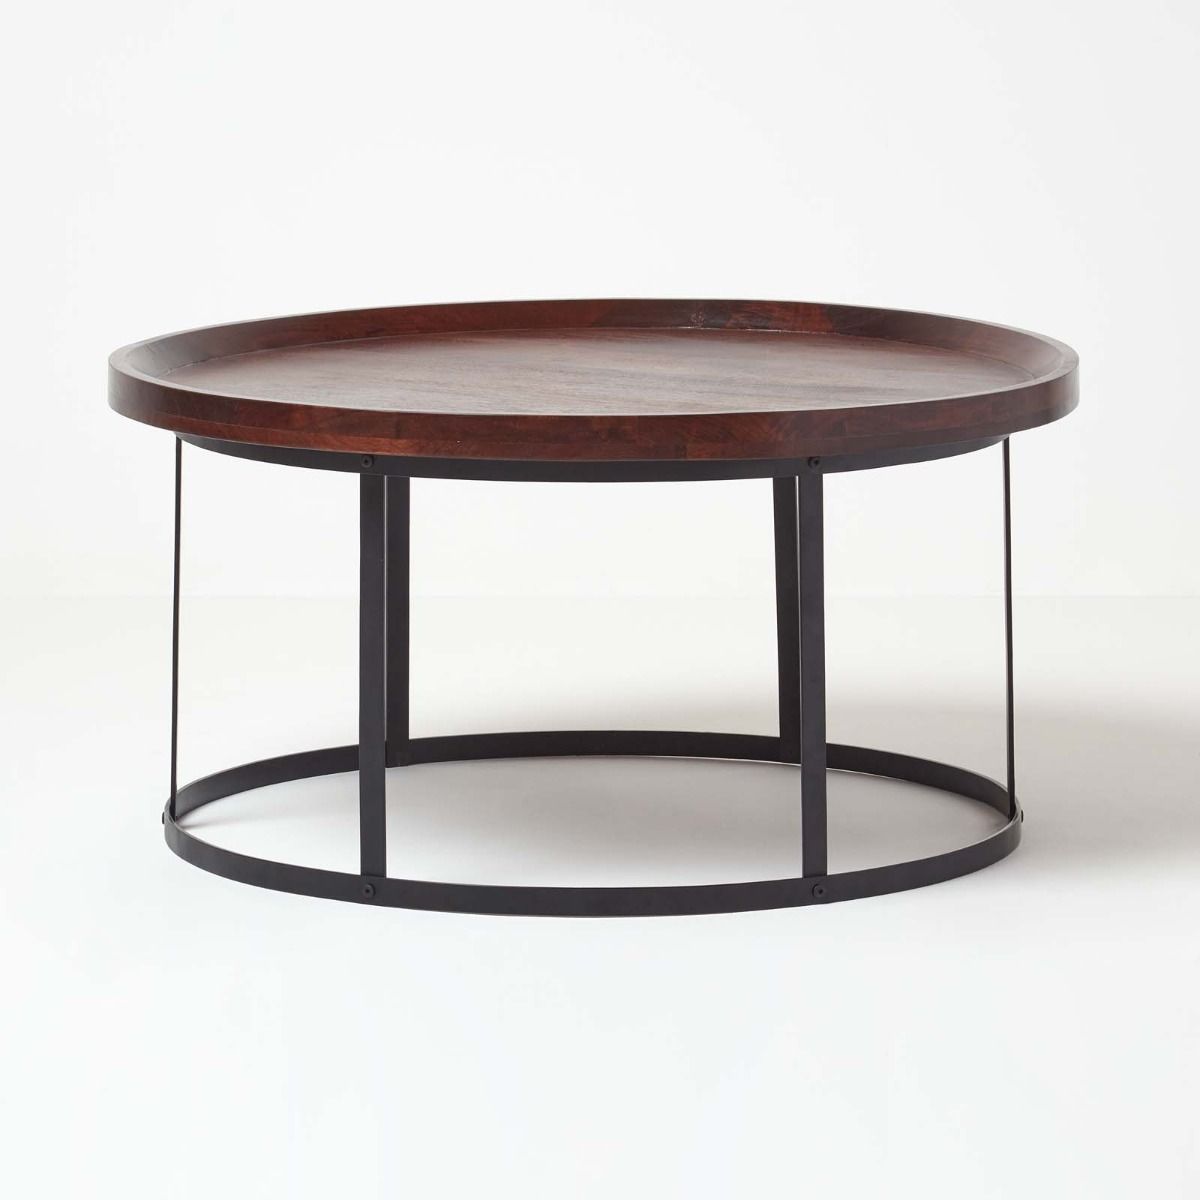 Industrial Round Coffee Table With Dark, Solid Wood Top Round Coffee Table